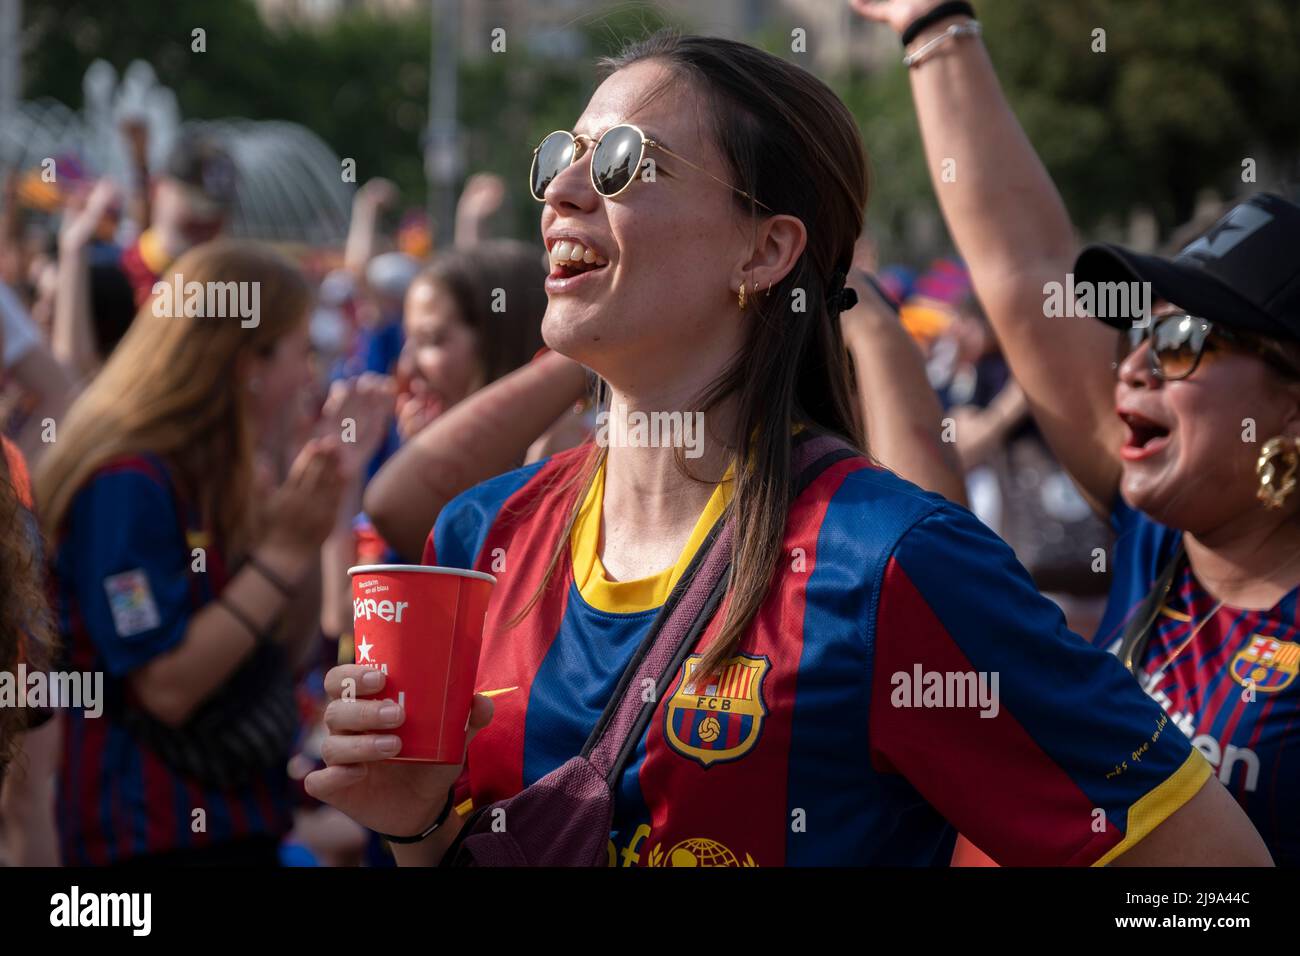 Barcelona, Spain. 21st May, 2022. A female Barcelona Football Club supporter wearing the club's shirt is seen chanting slogans before the start of the match. Followers of the Barcelona Women's Soccer Club gathered at Plaza Catalunya to follow on a giant screen the final of the women's Champions League between Olympique of Lyon Women and FC Barcelona Women. Final score Olympique of Lyon Women 3-1 FC Barcelona Women. (Photo by Paco Freire/SOPA Images/Sipa USA) Credit: Sipa USA/Alamy Live News Stock Photo